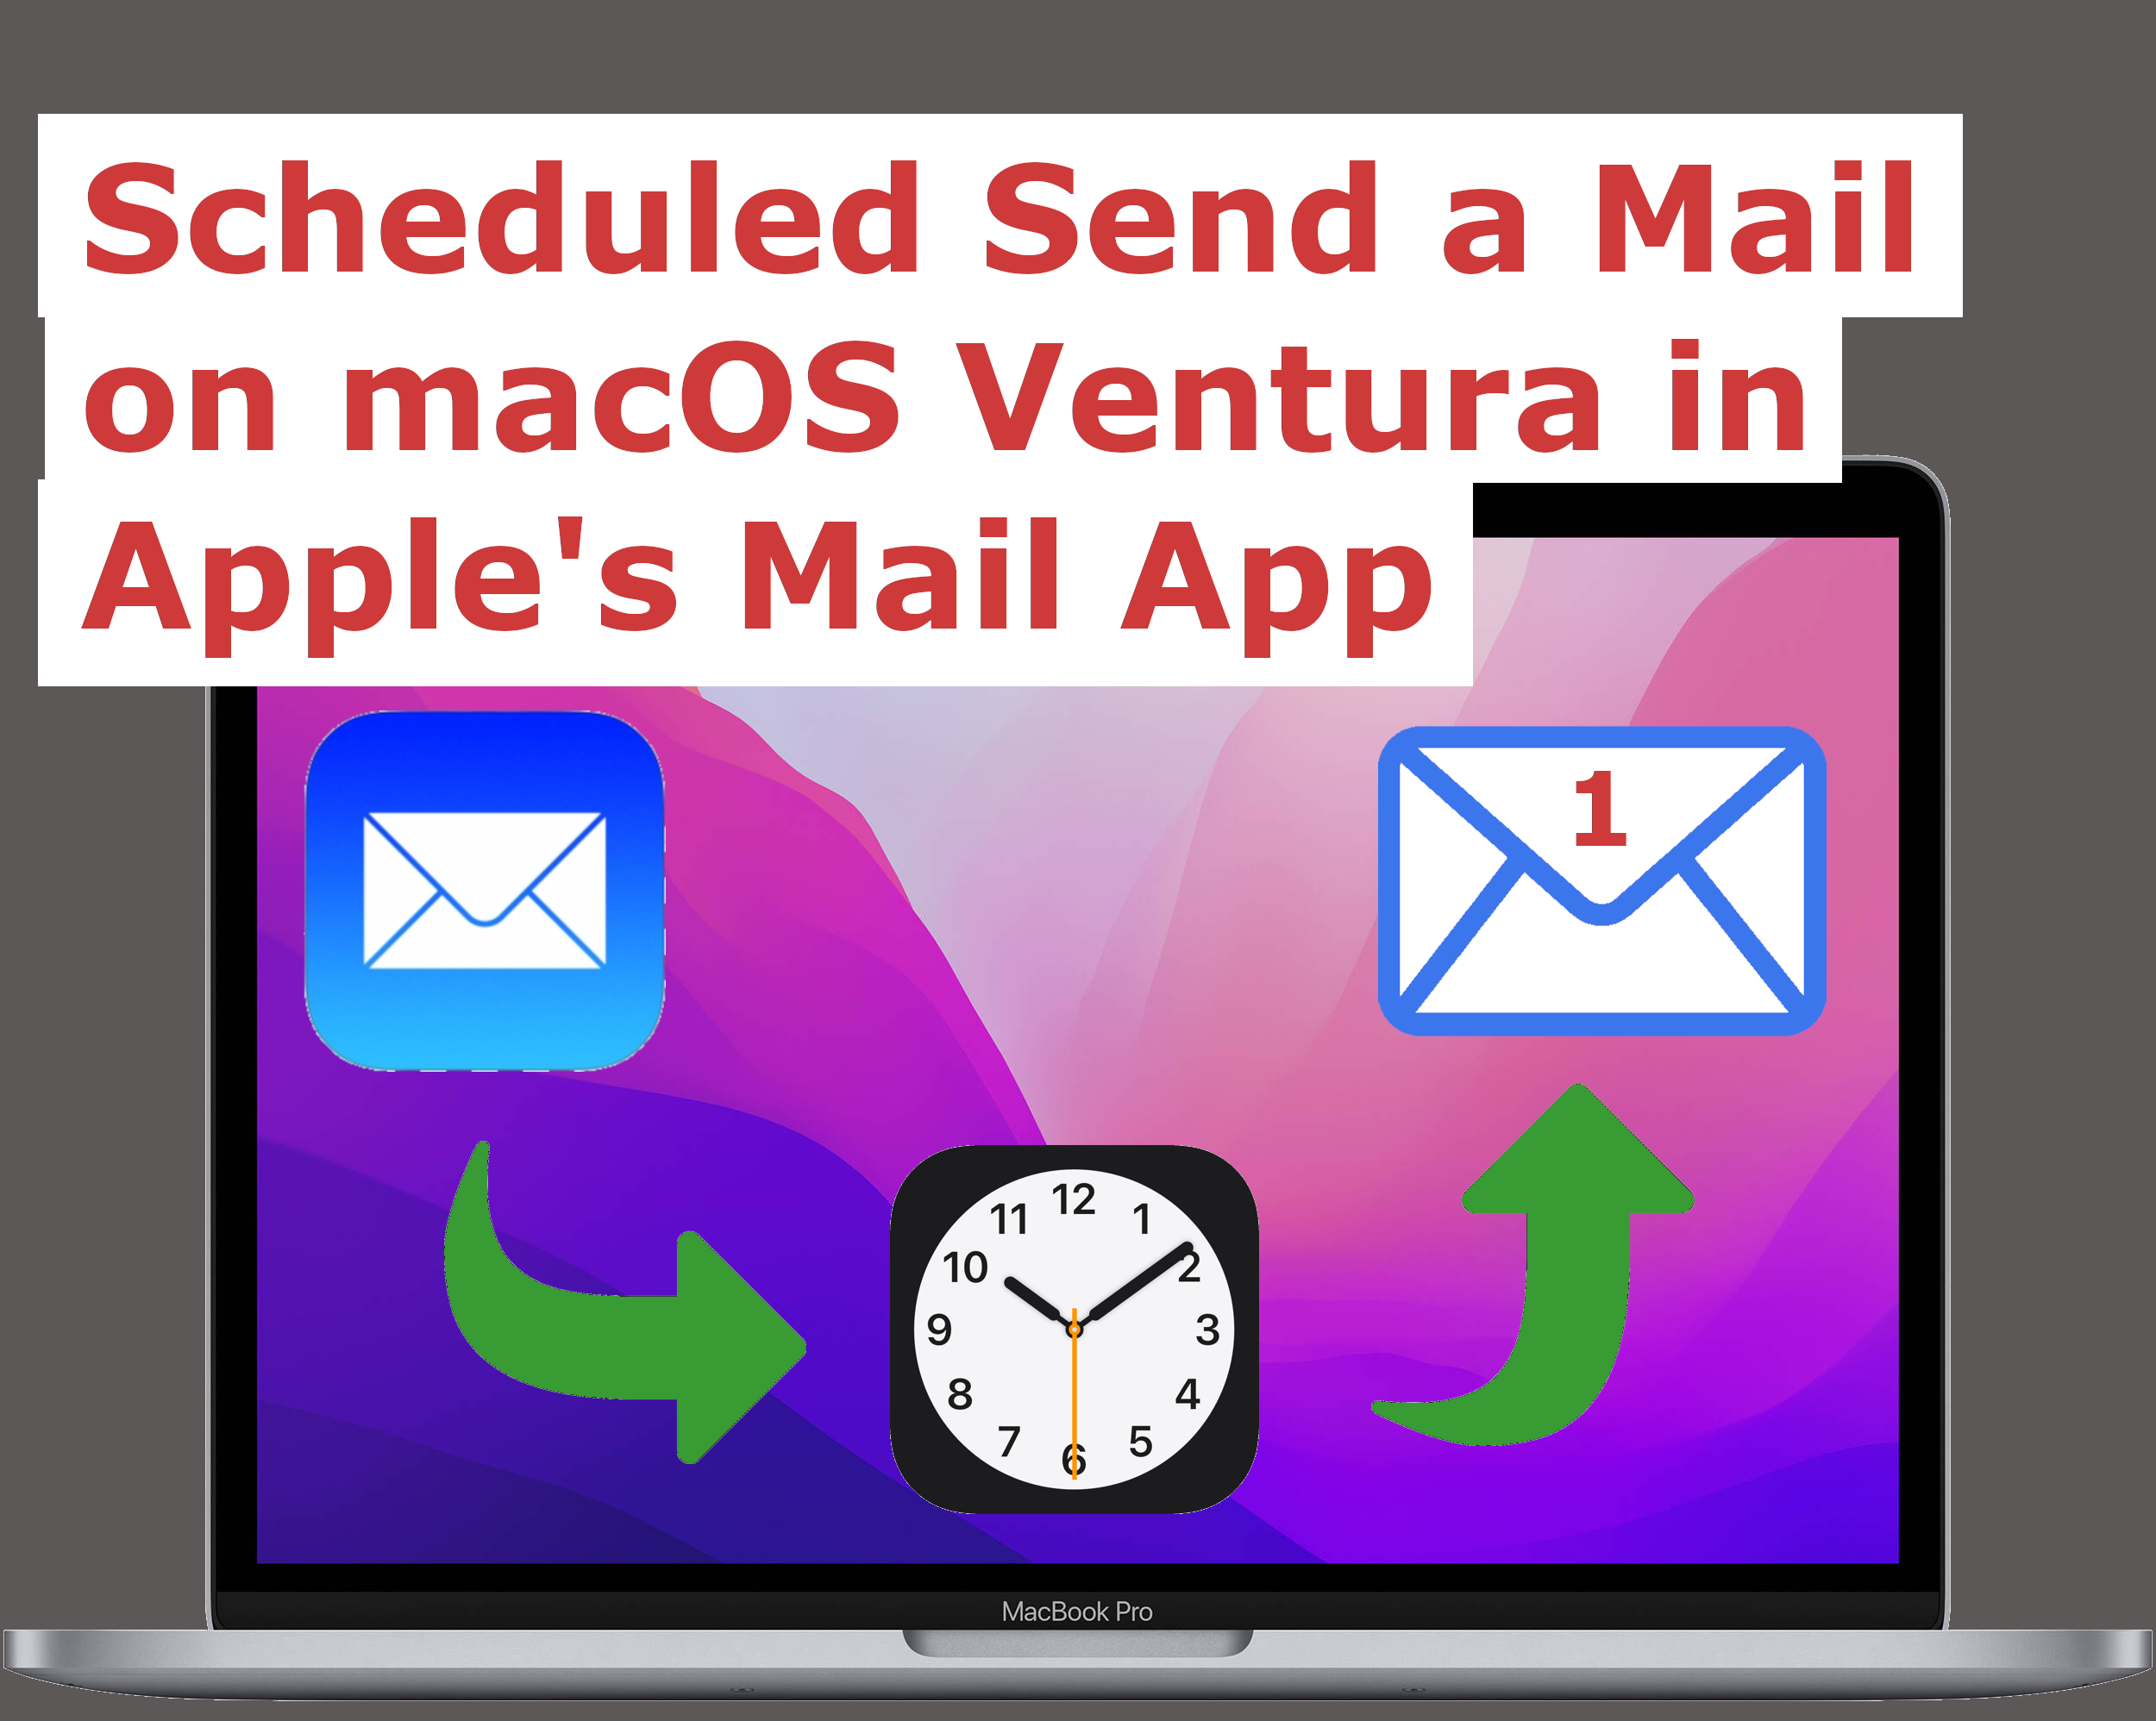 You can schedule a mail to be sent on Apple's Mail app on macOS